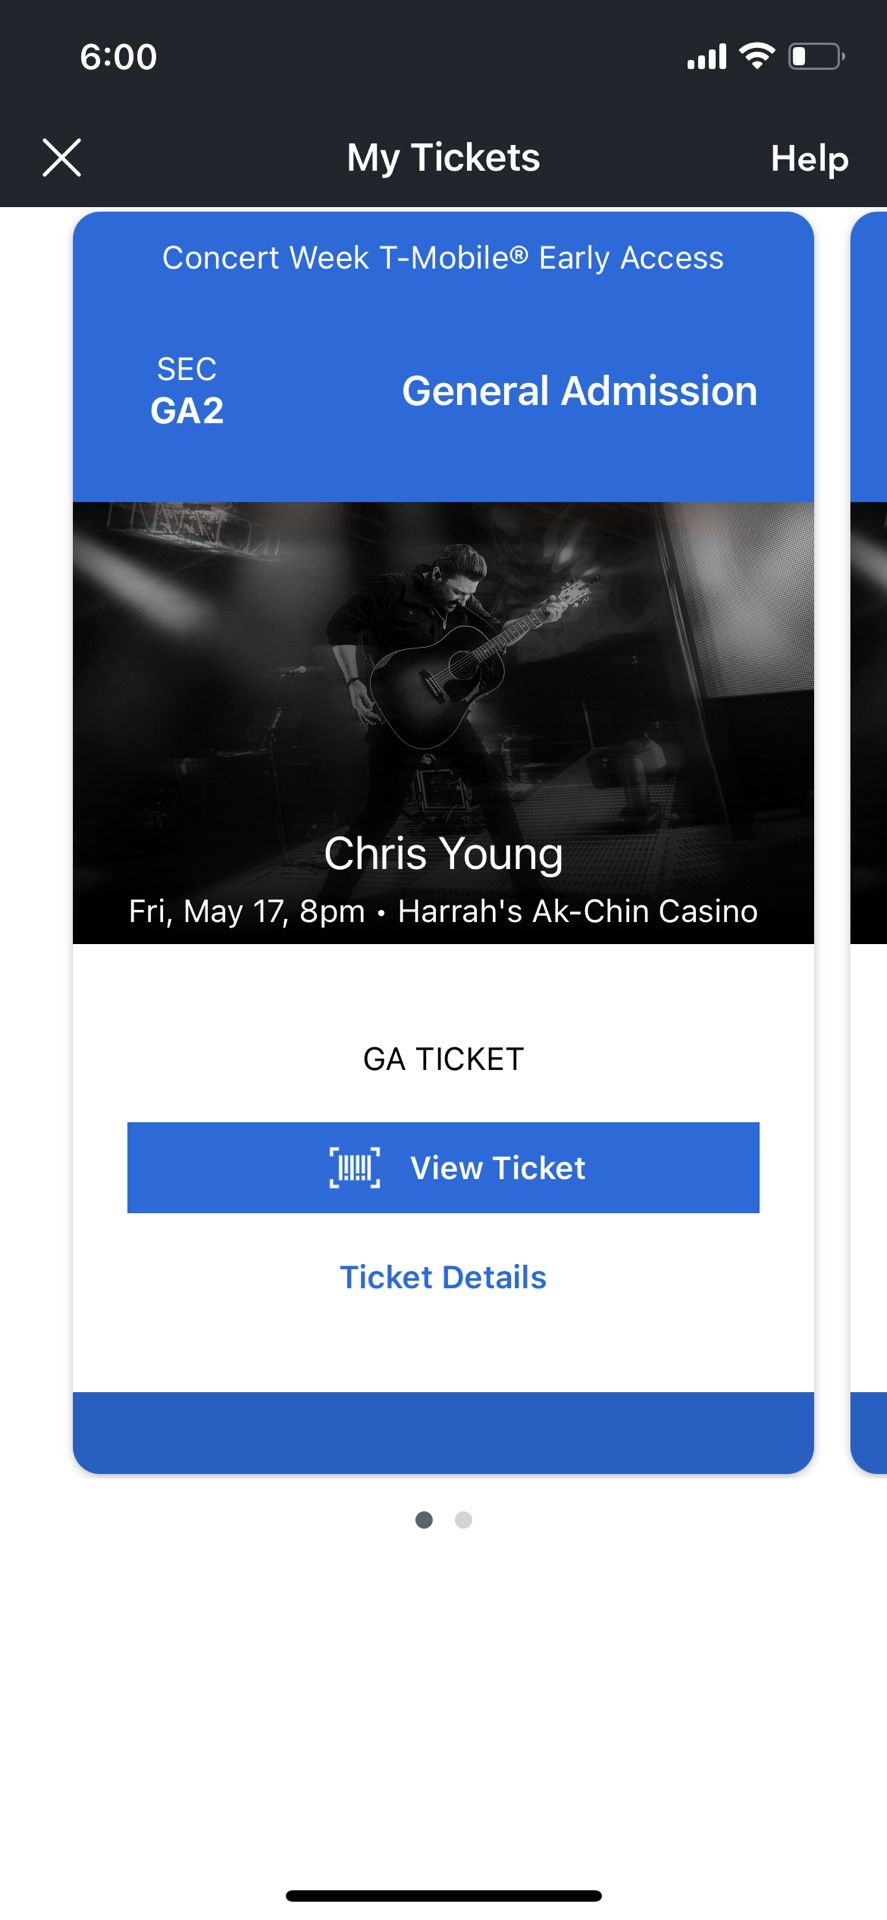 Chris Young Tickets 